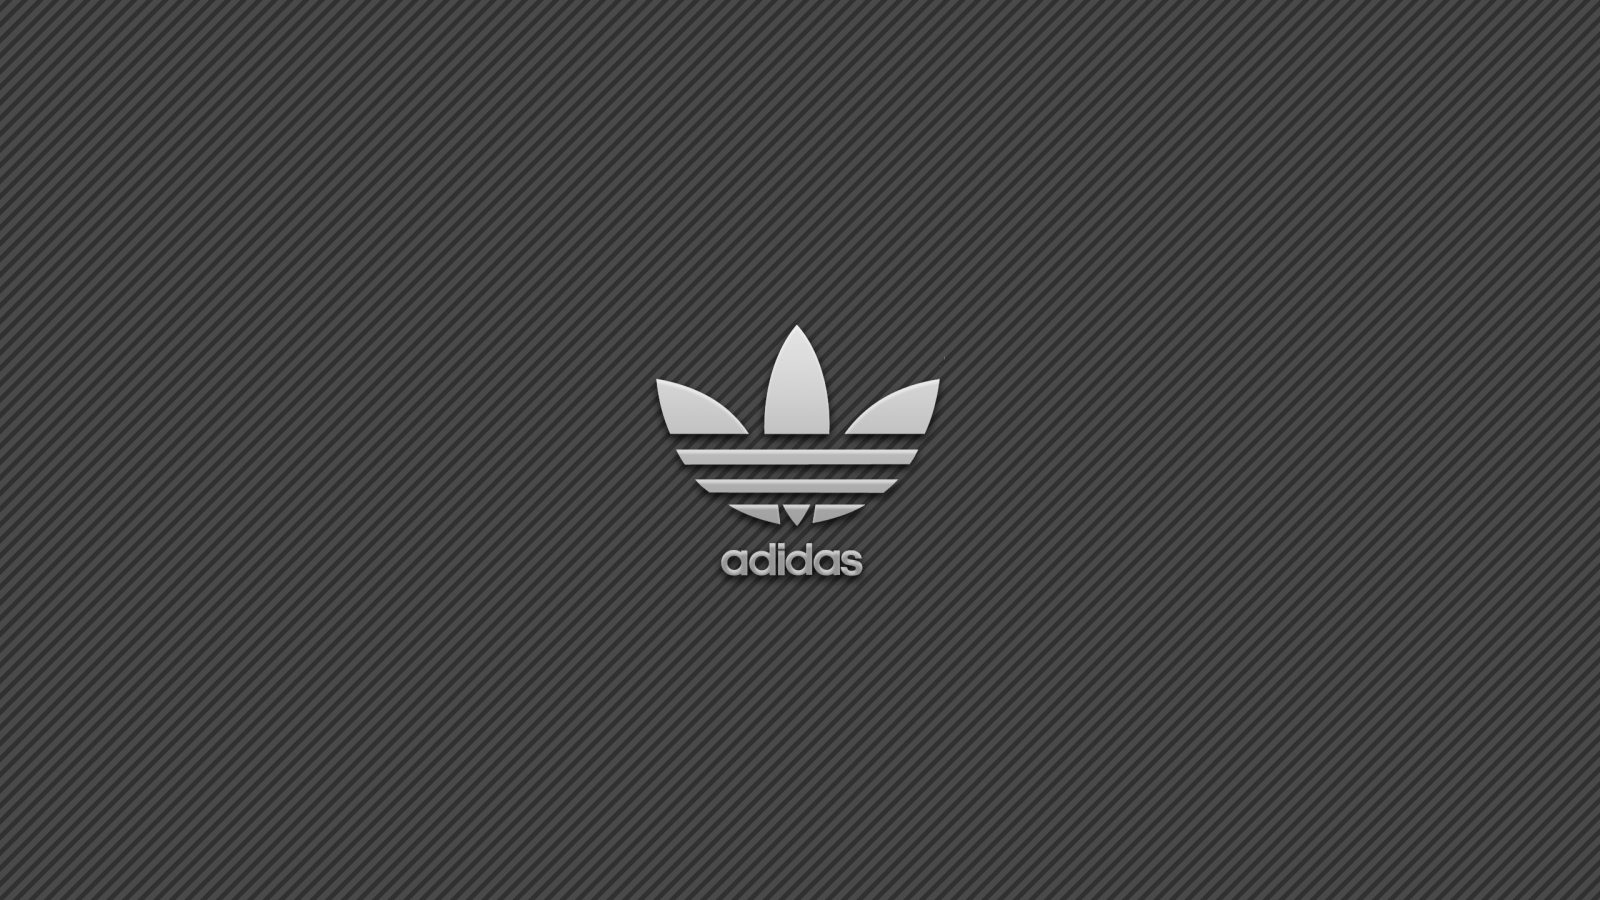 Adidas Simple Logo Background for 1600 x 900 HDTV resolution